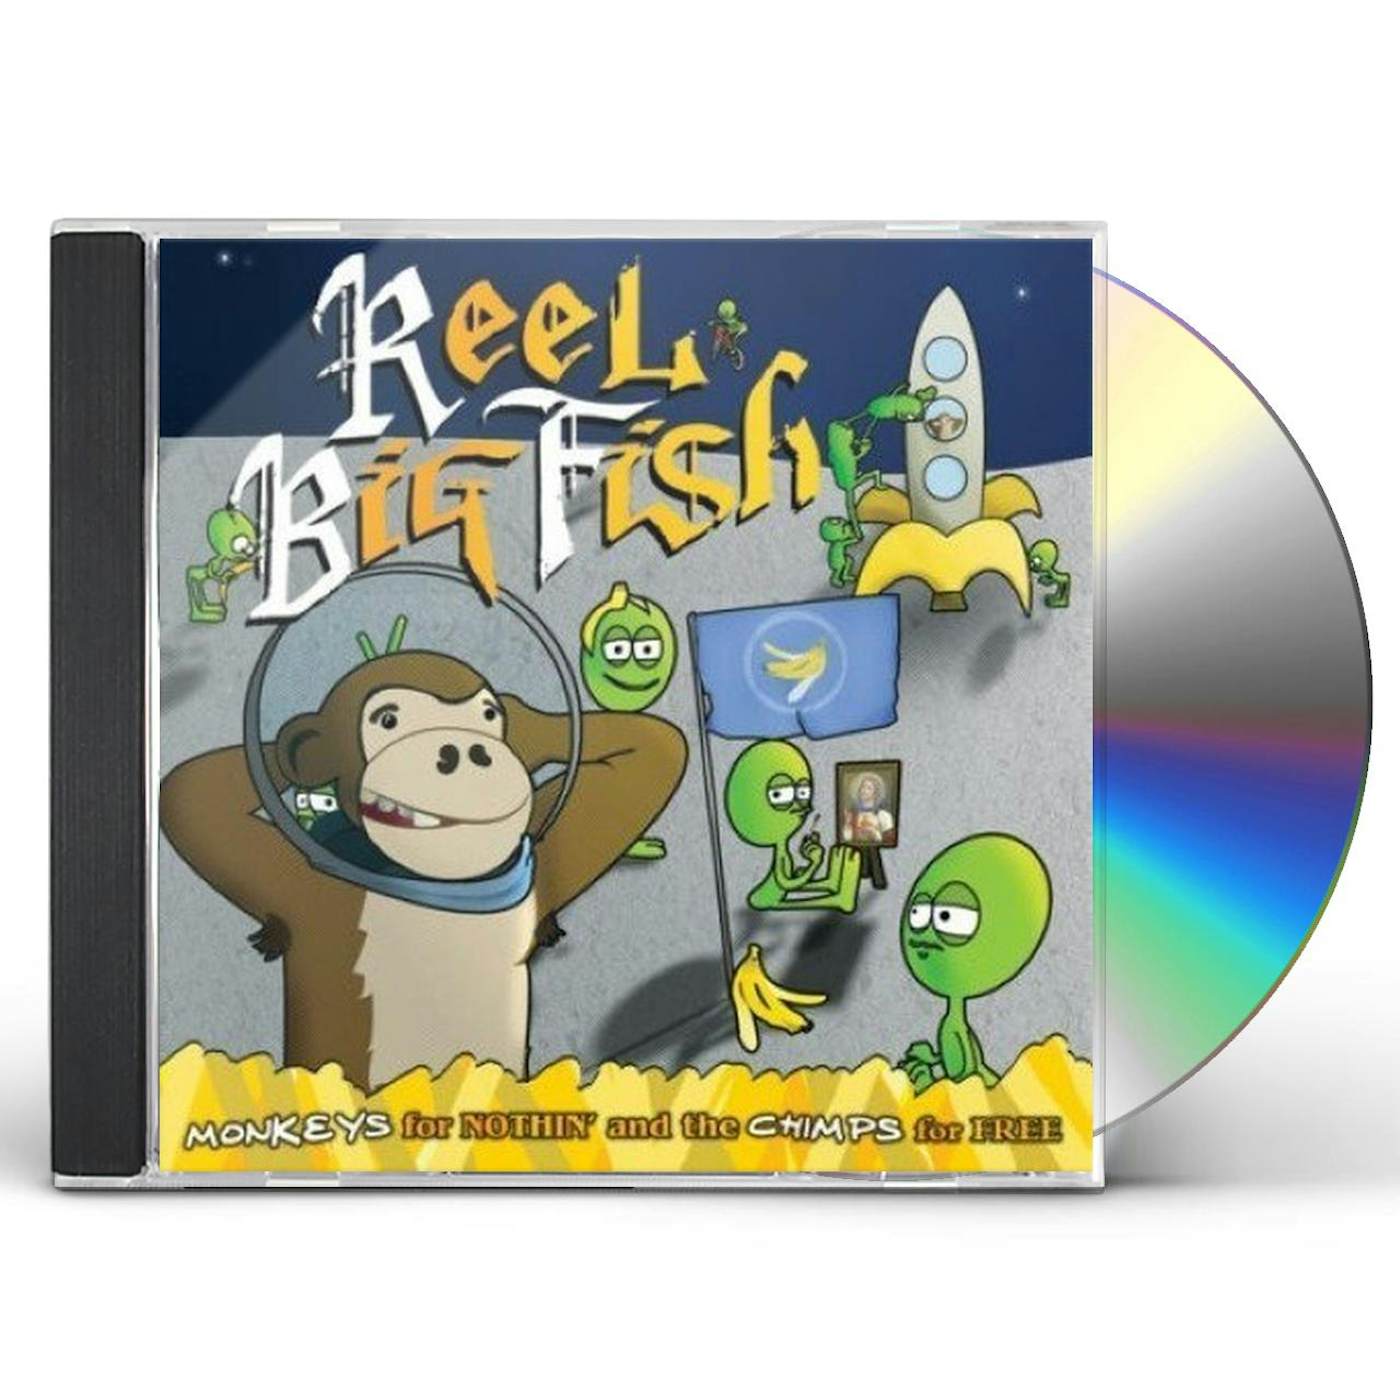 monkeys for nothin & the chimps for free cd - Reel Big Fish